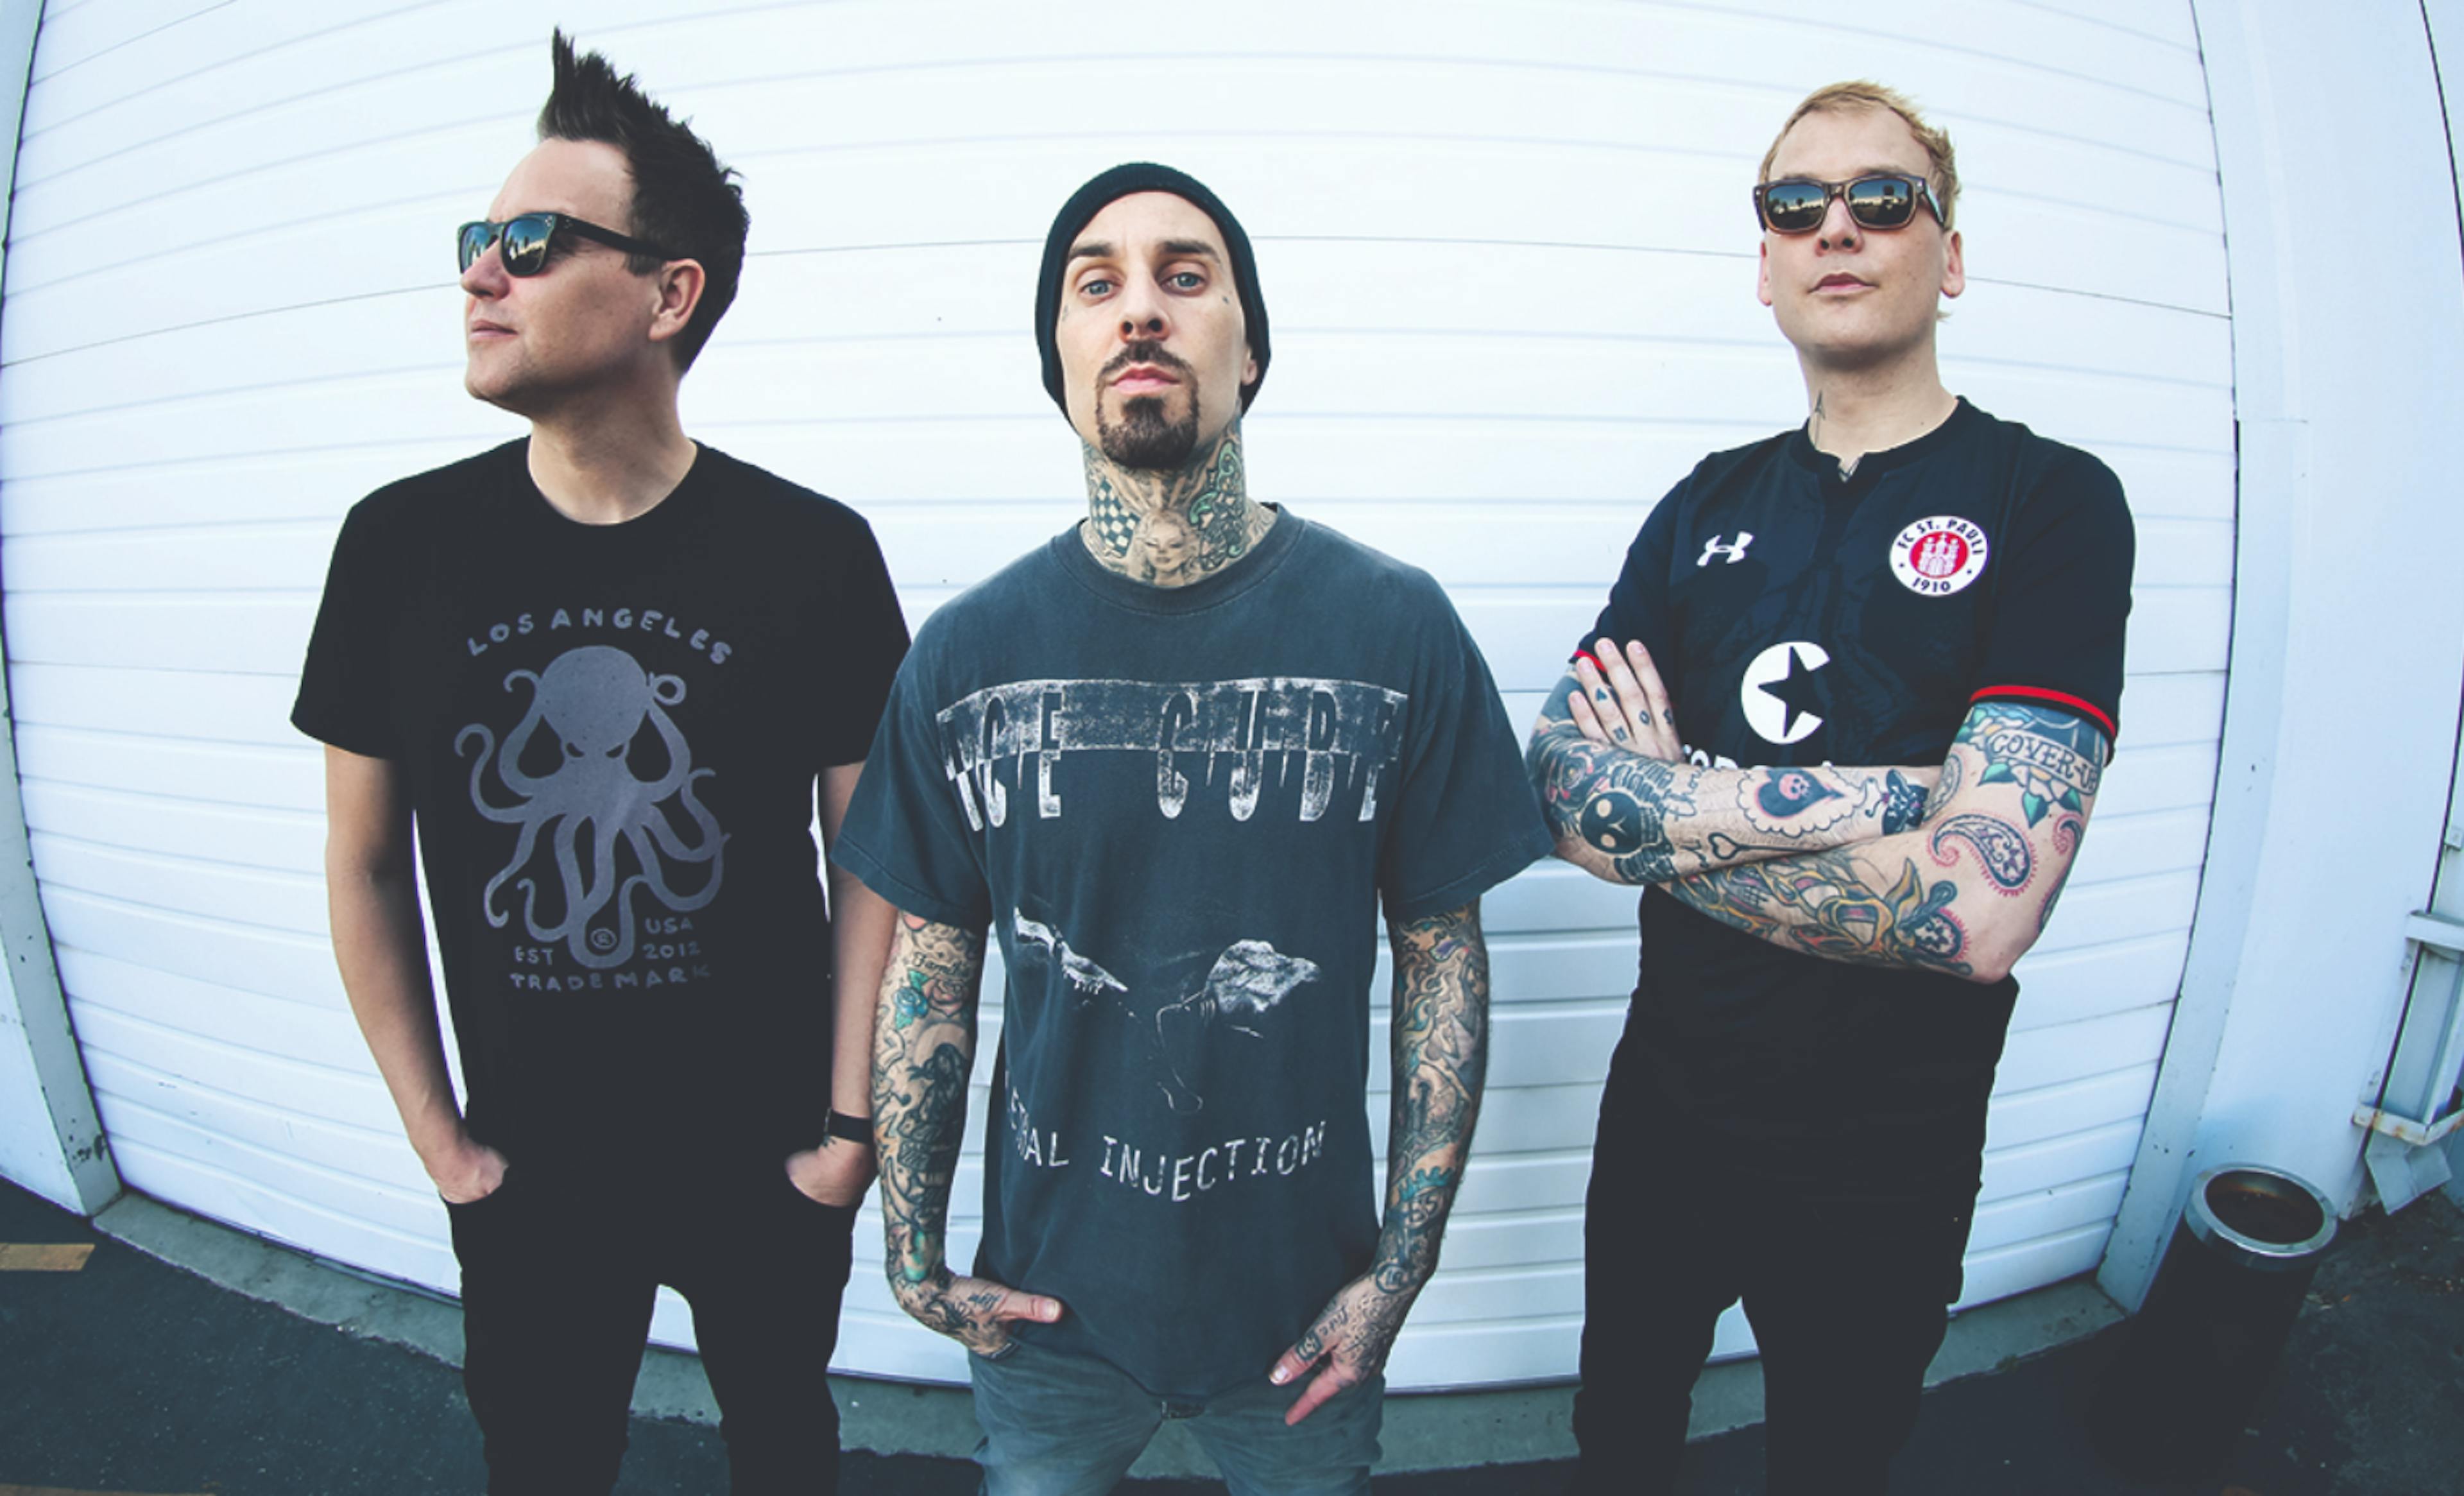 Mark Hoppus Wants To Take blink-182 "In Completely Weird Directions"